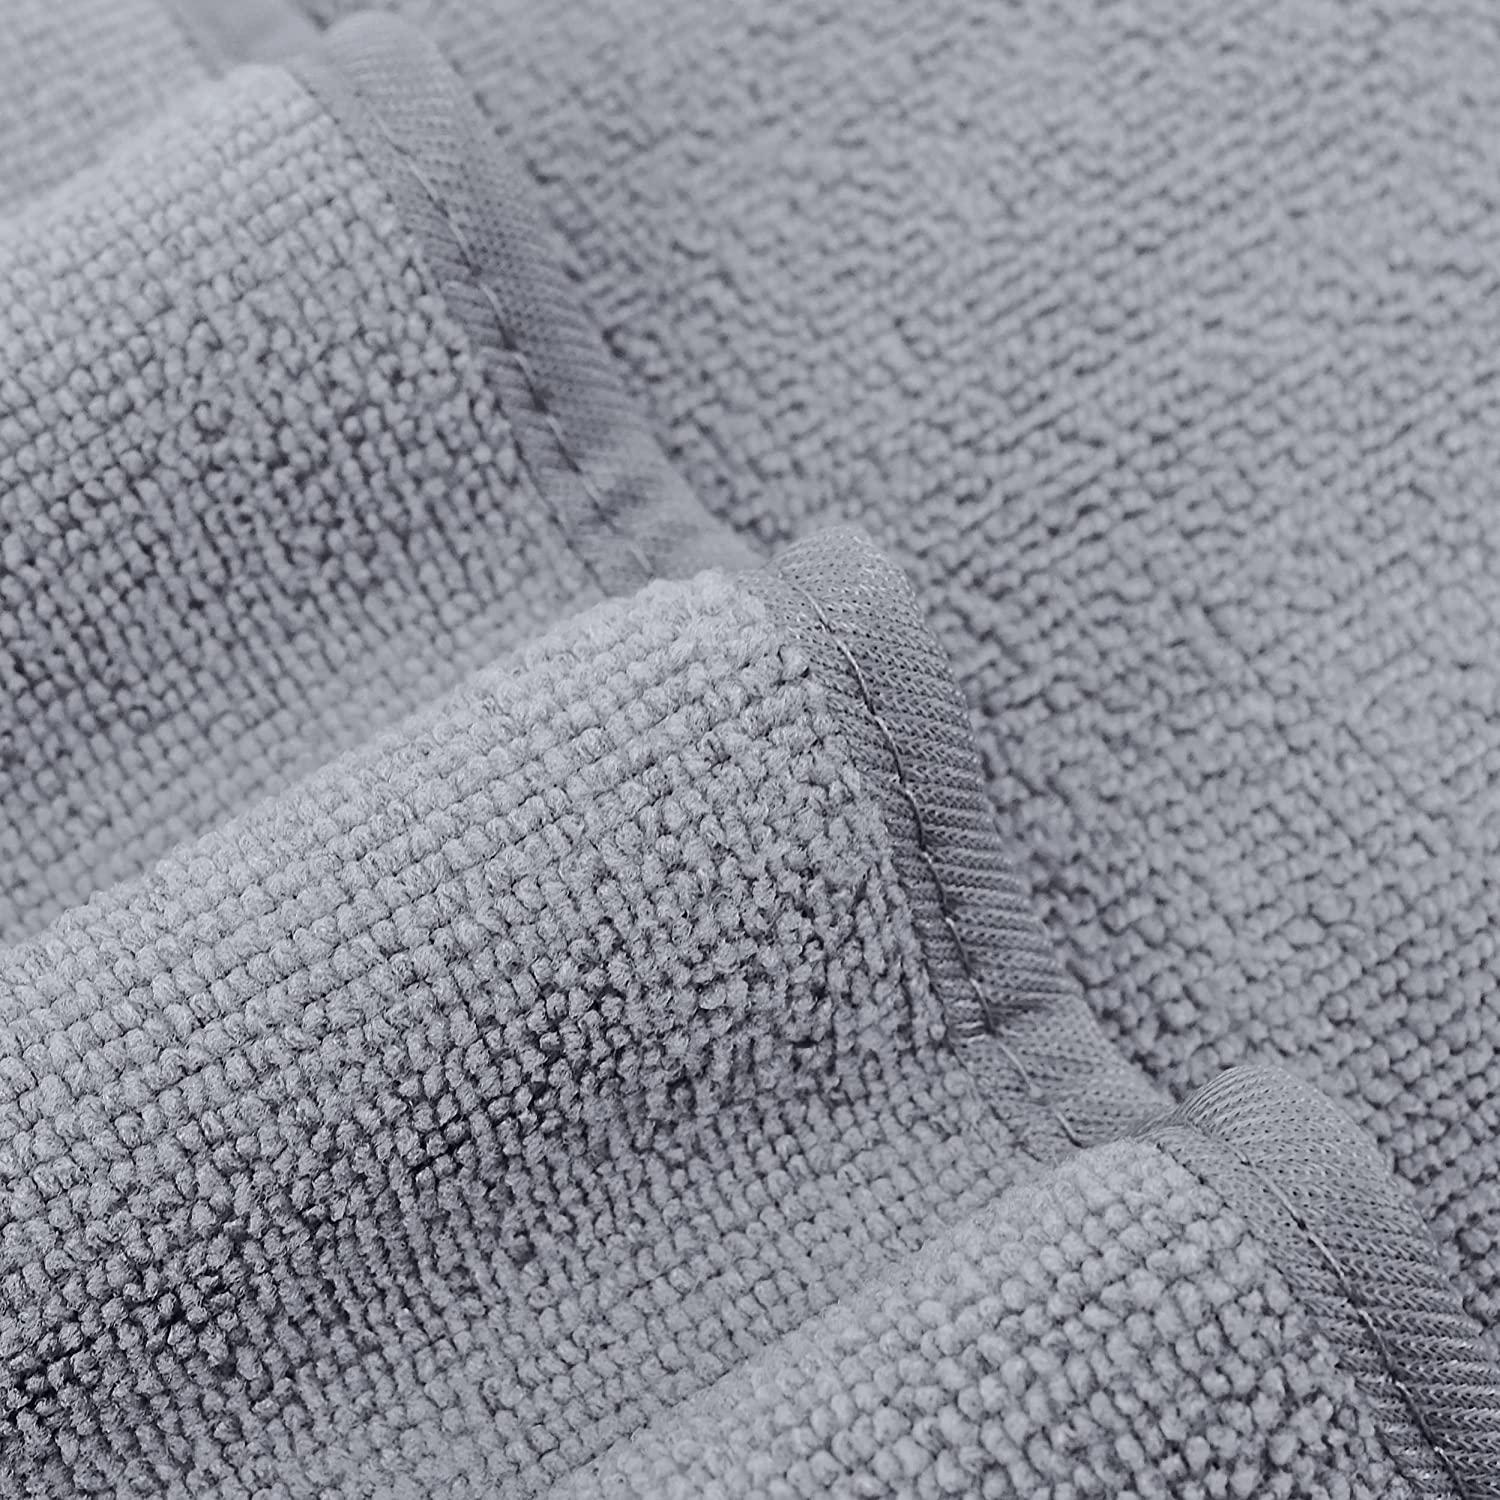 POLYTE Microfiber Oversize Quick Dry Lint Free Bath Towel, 60 x 30 in, Set  of 2 (White, Waffle Weave)